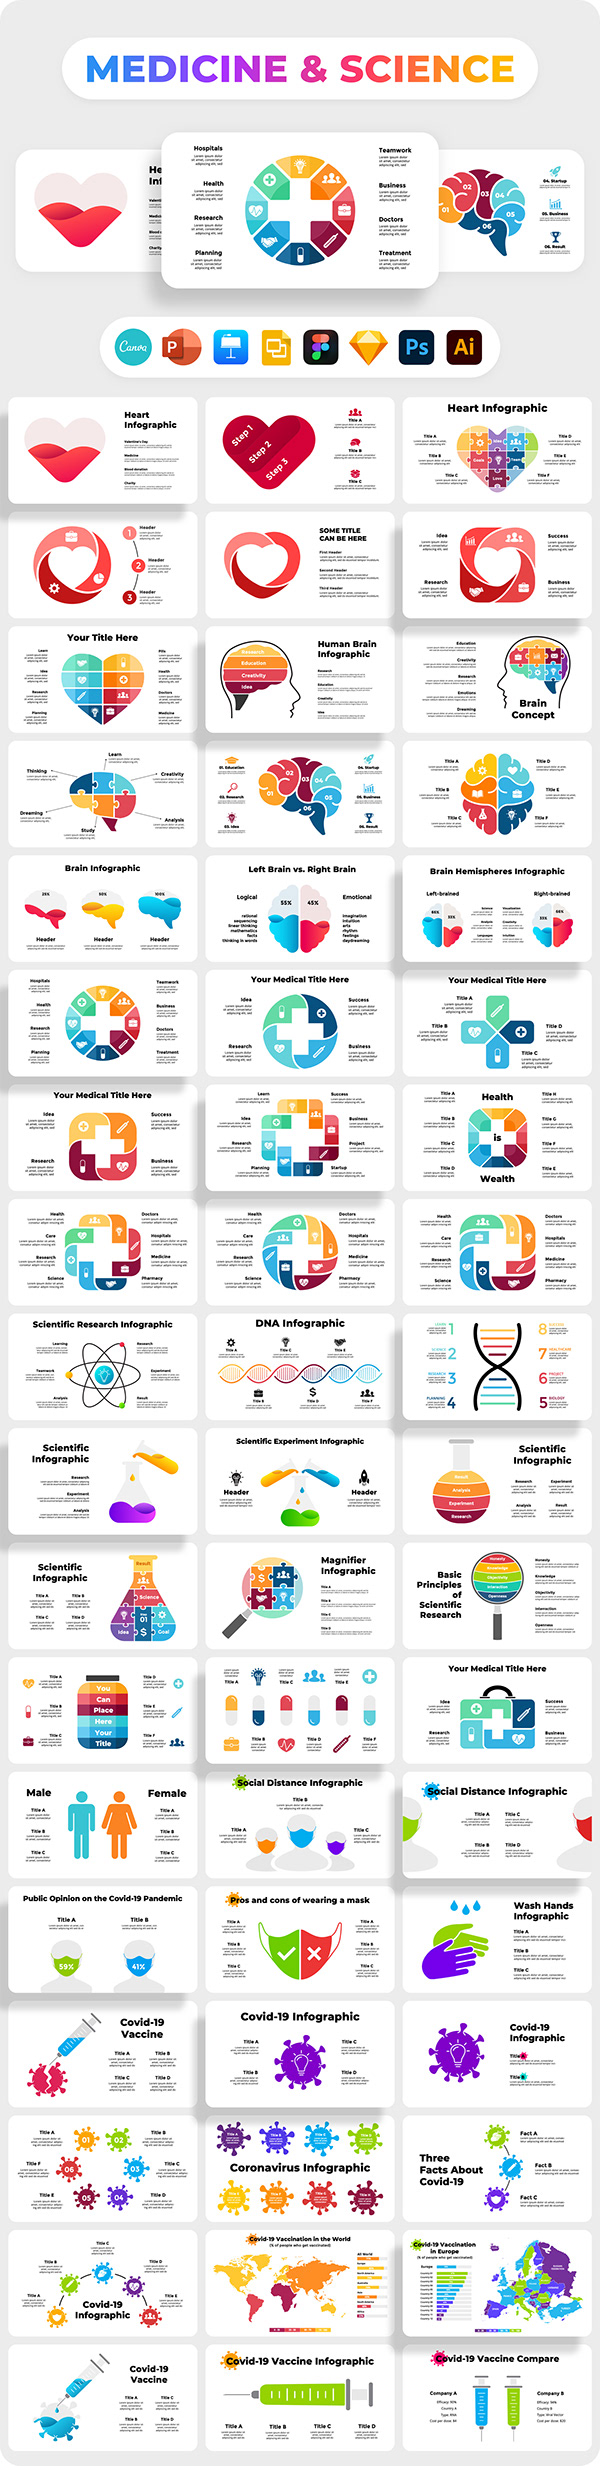 Free Medical Scientific Infographic Template PowerPoint